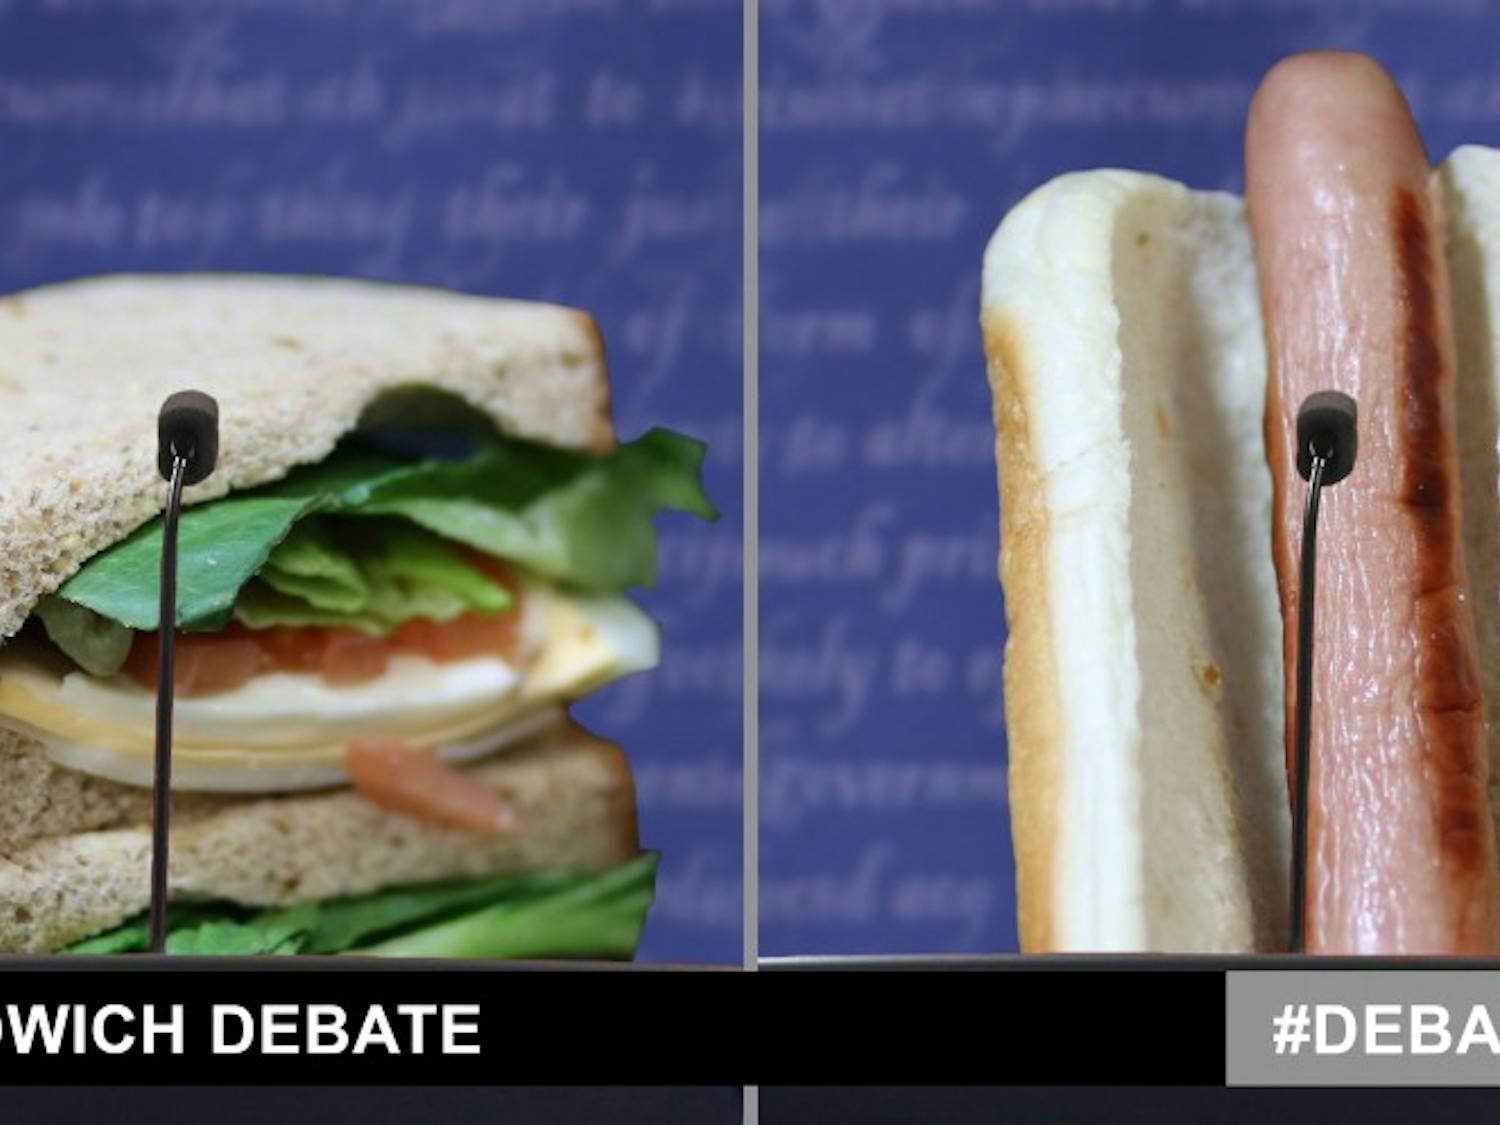 A sandwich and a hot dog are ready to hash out their views. Debate over what constitutes a sandwich can reach the same intensity of current political discourse.